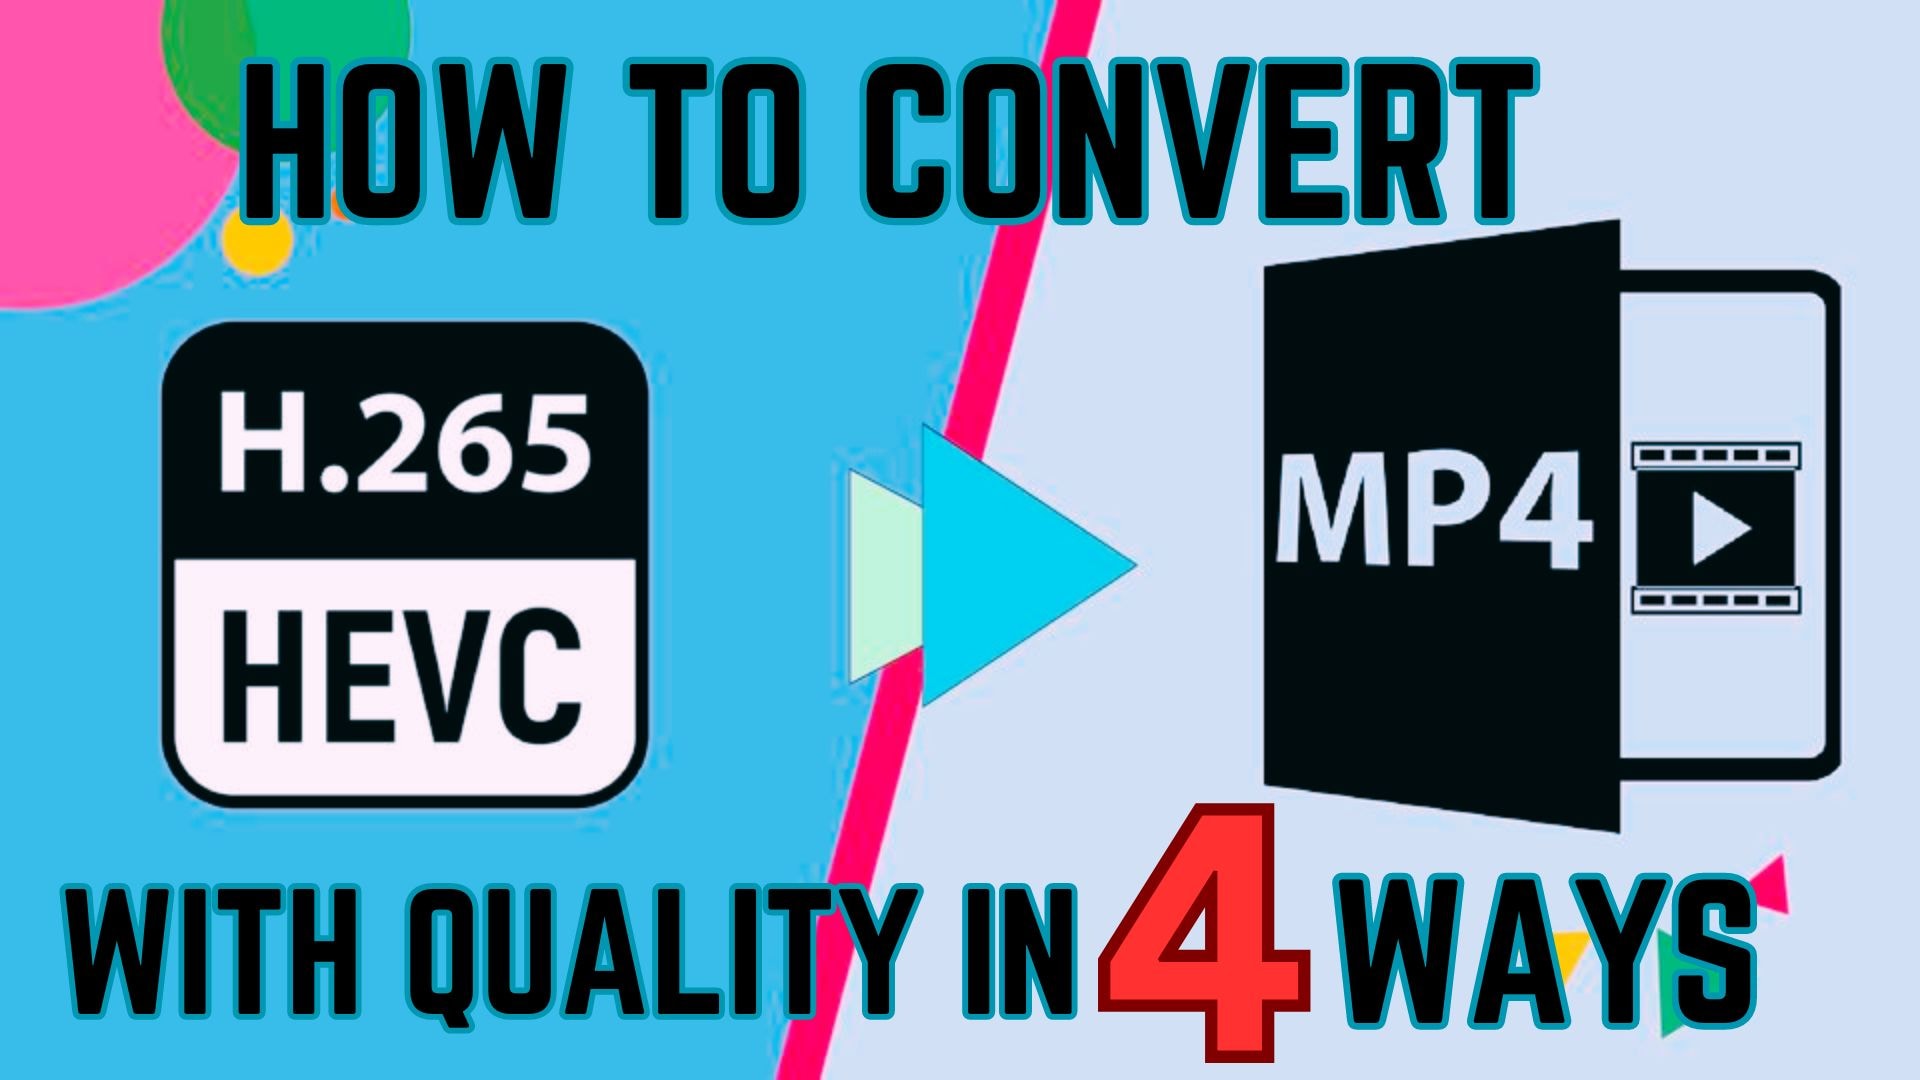 How to Convert HEVC to MP4 File Format with Quality in 4 Ways